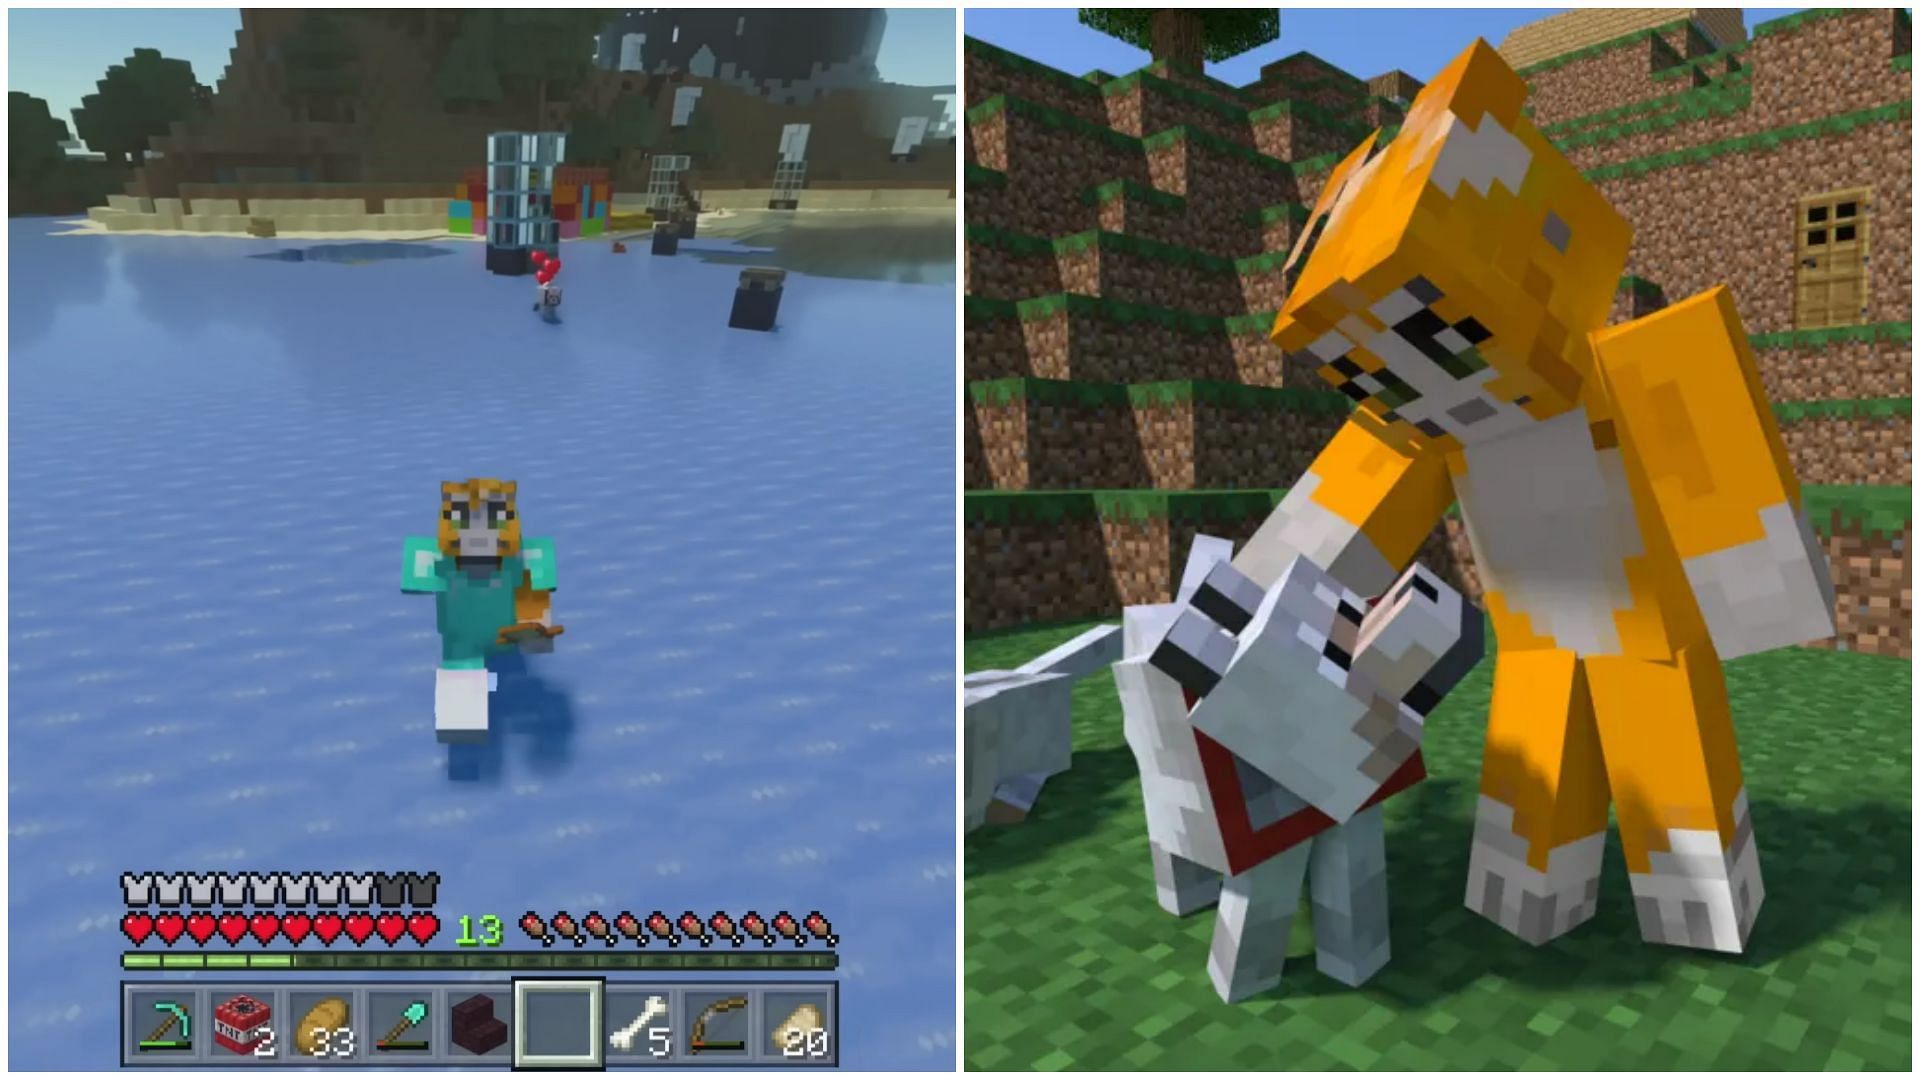 Stampylonghead finally ends his long-lasting Minecraft let